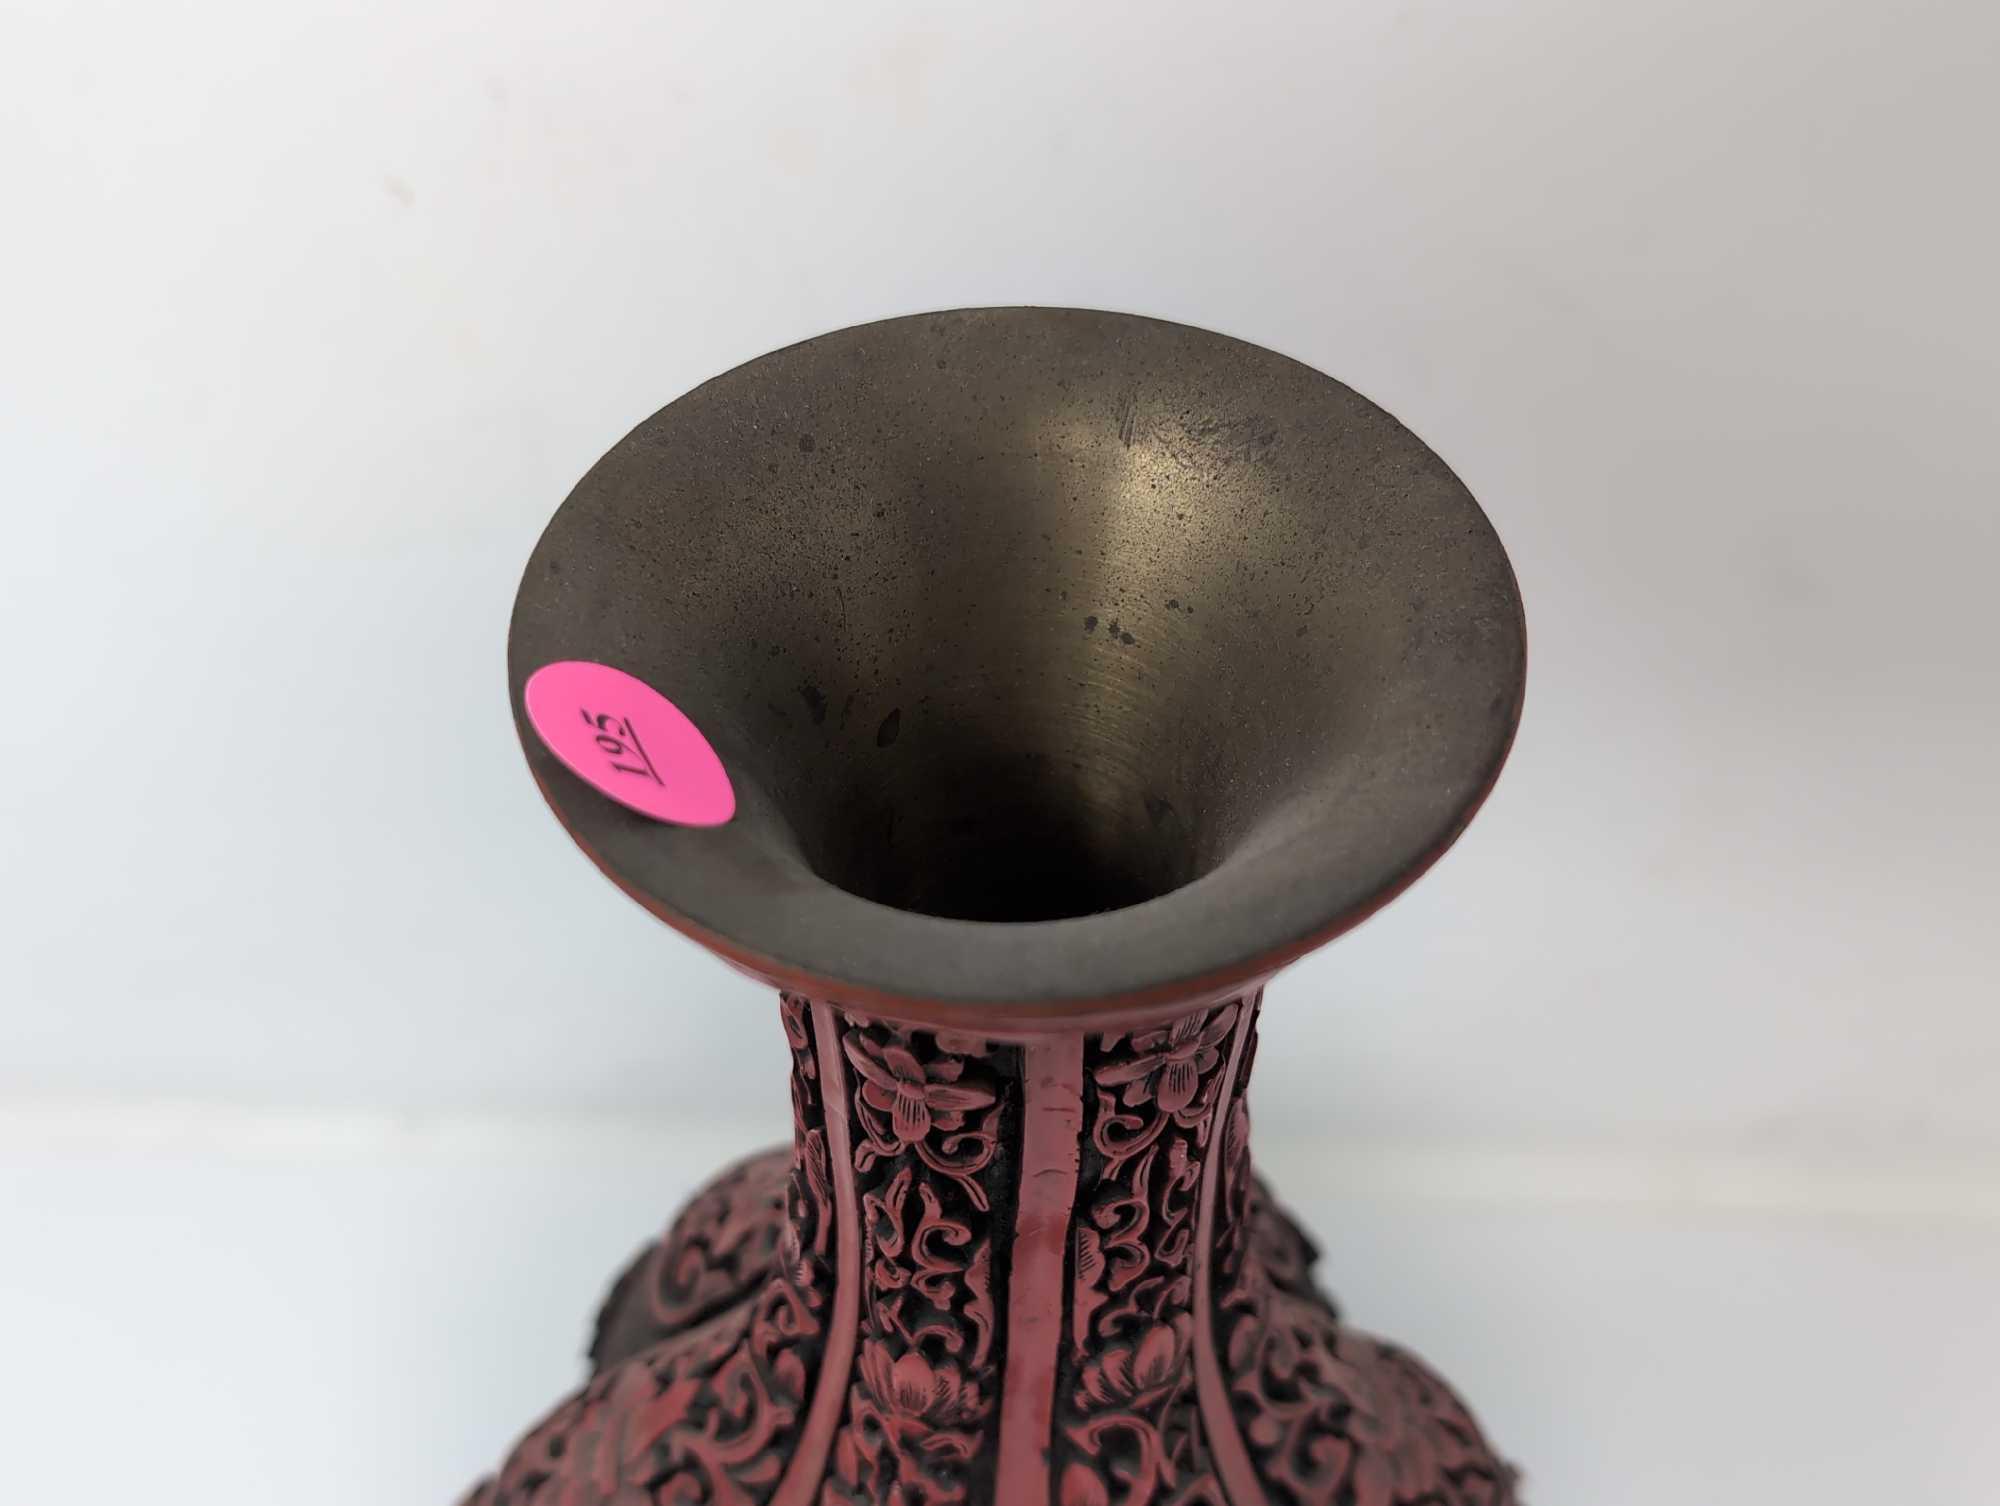 (LR) VINTAGE CHINESE CARVED CINNABAR & BRASS FLOWER VASE. BEAUTIFUL ORNATE FLORAL DETAILING WITH A